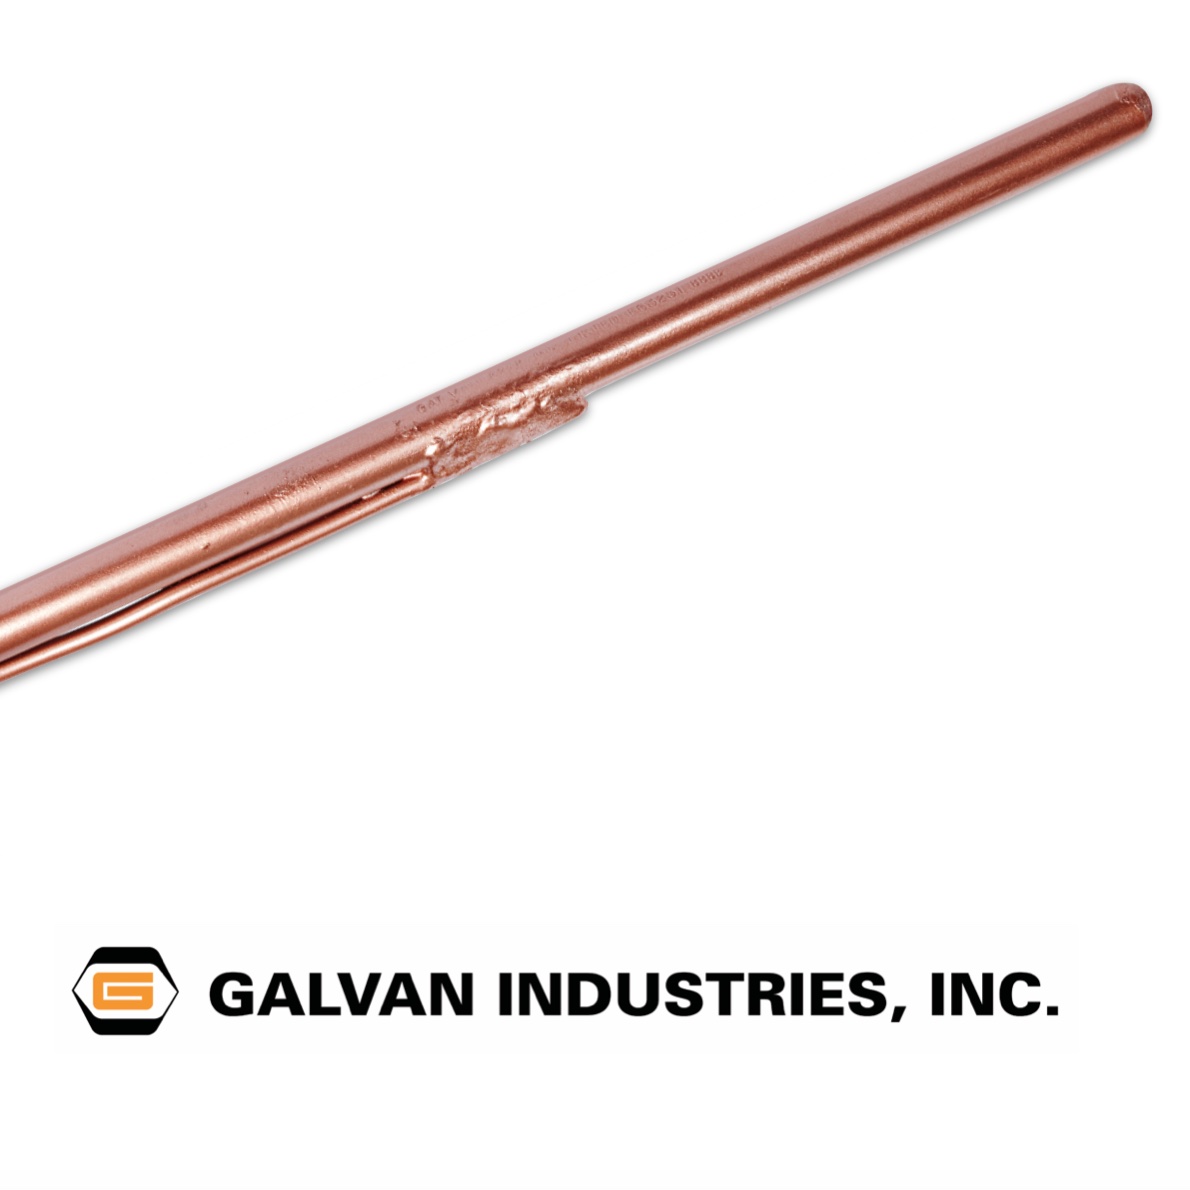 Galvan Copper-Bonded Pigtail Ground Rods Meet RUS Requirements, and Make Installation Faster and Safer